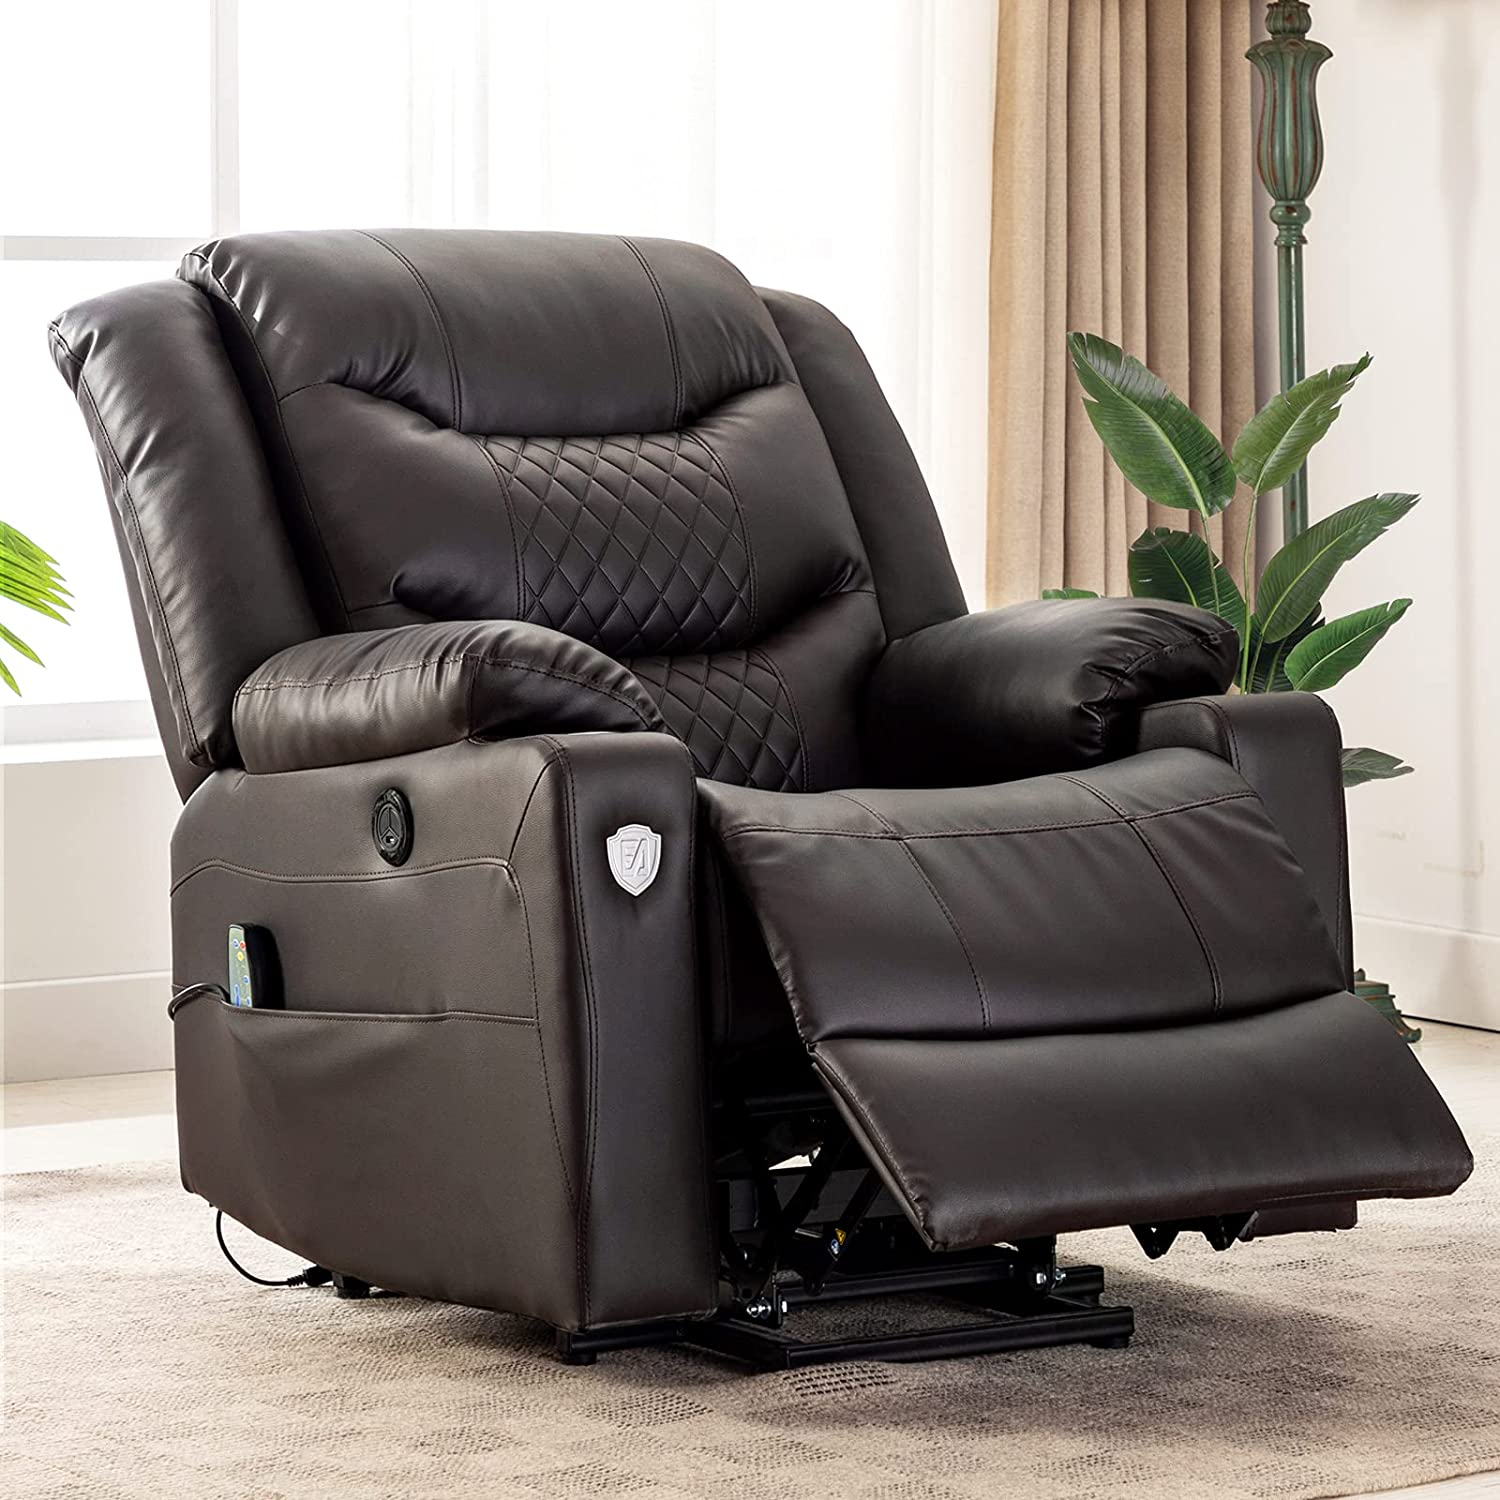 What Is The Best Rated Power Lift Recliner